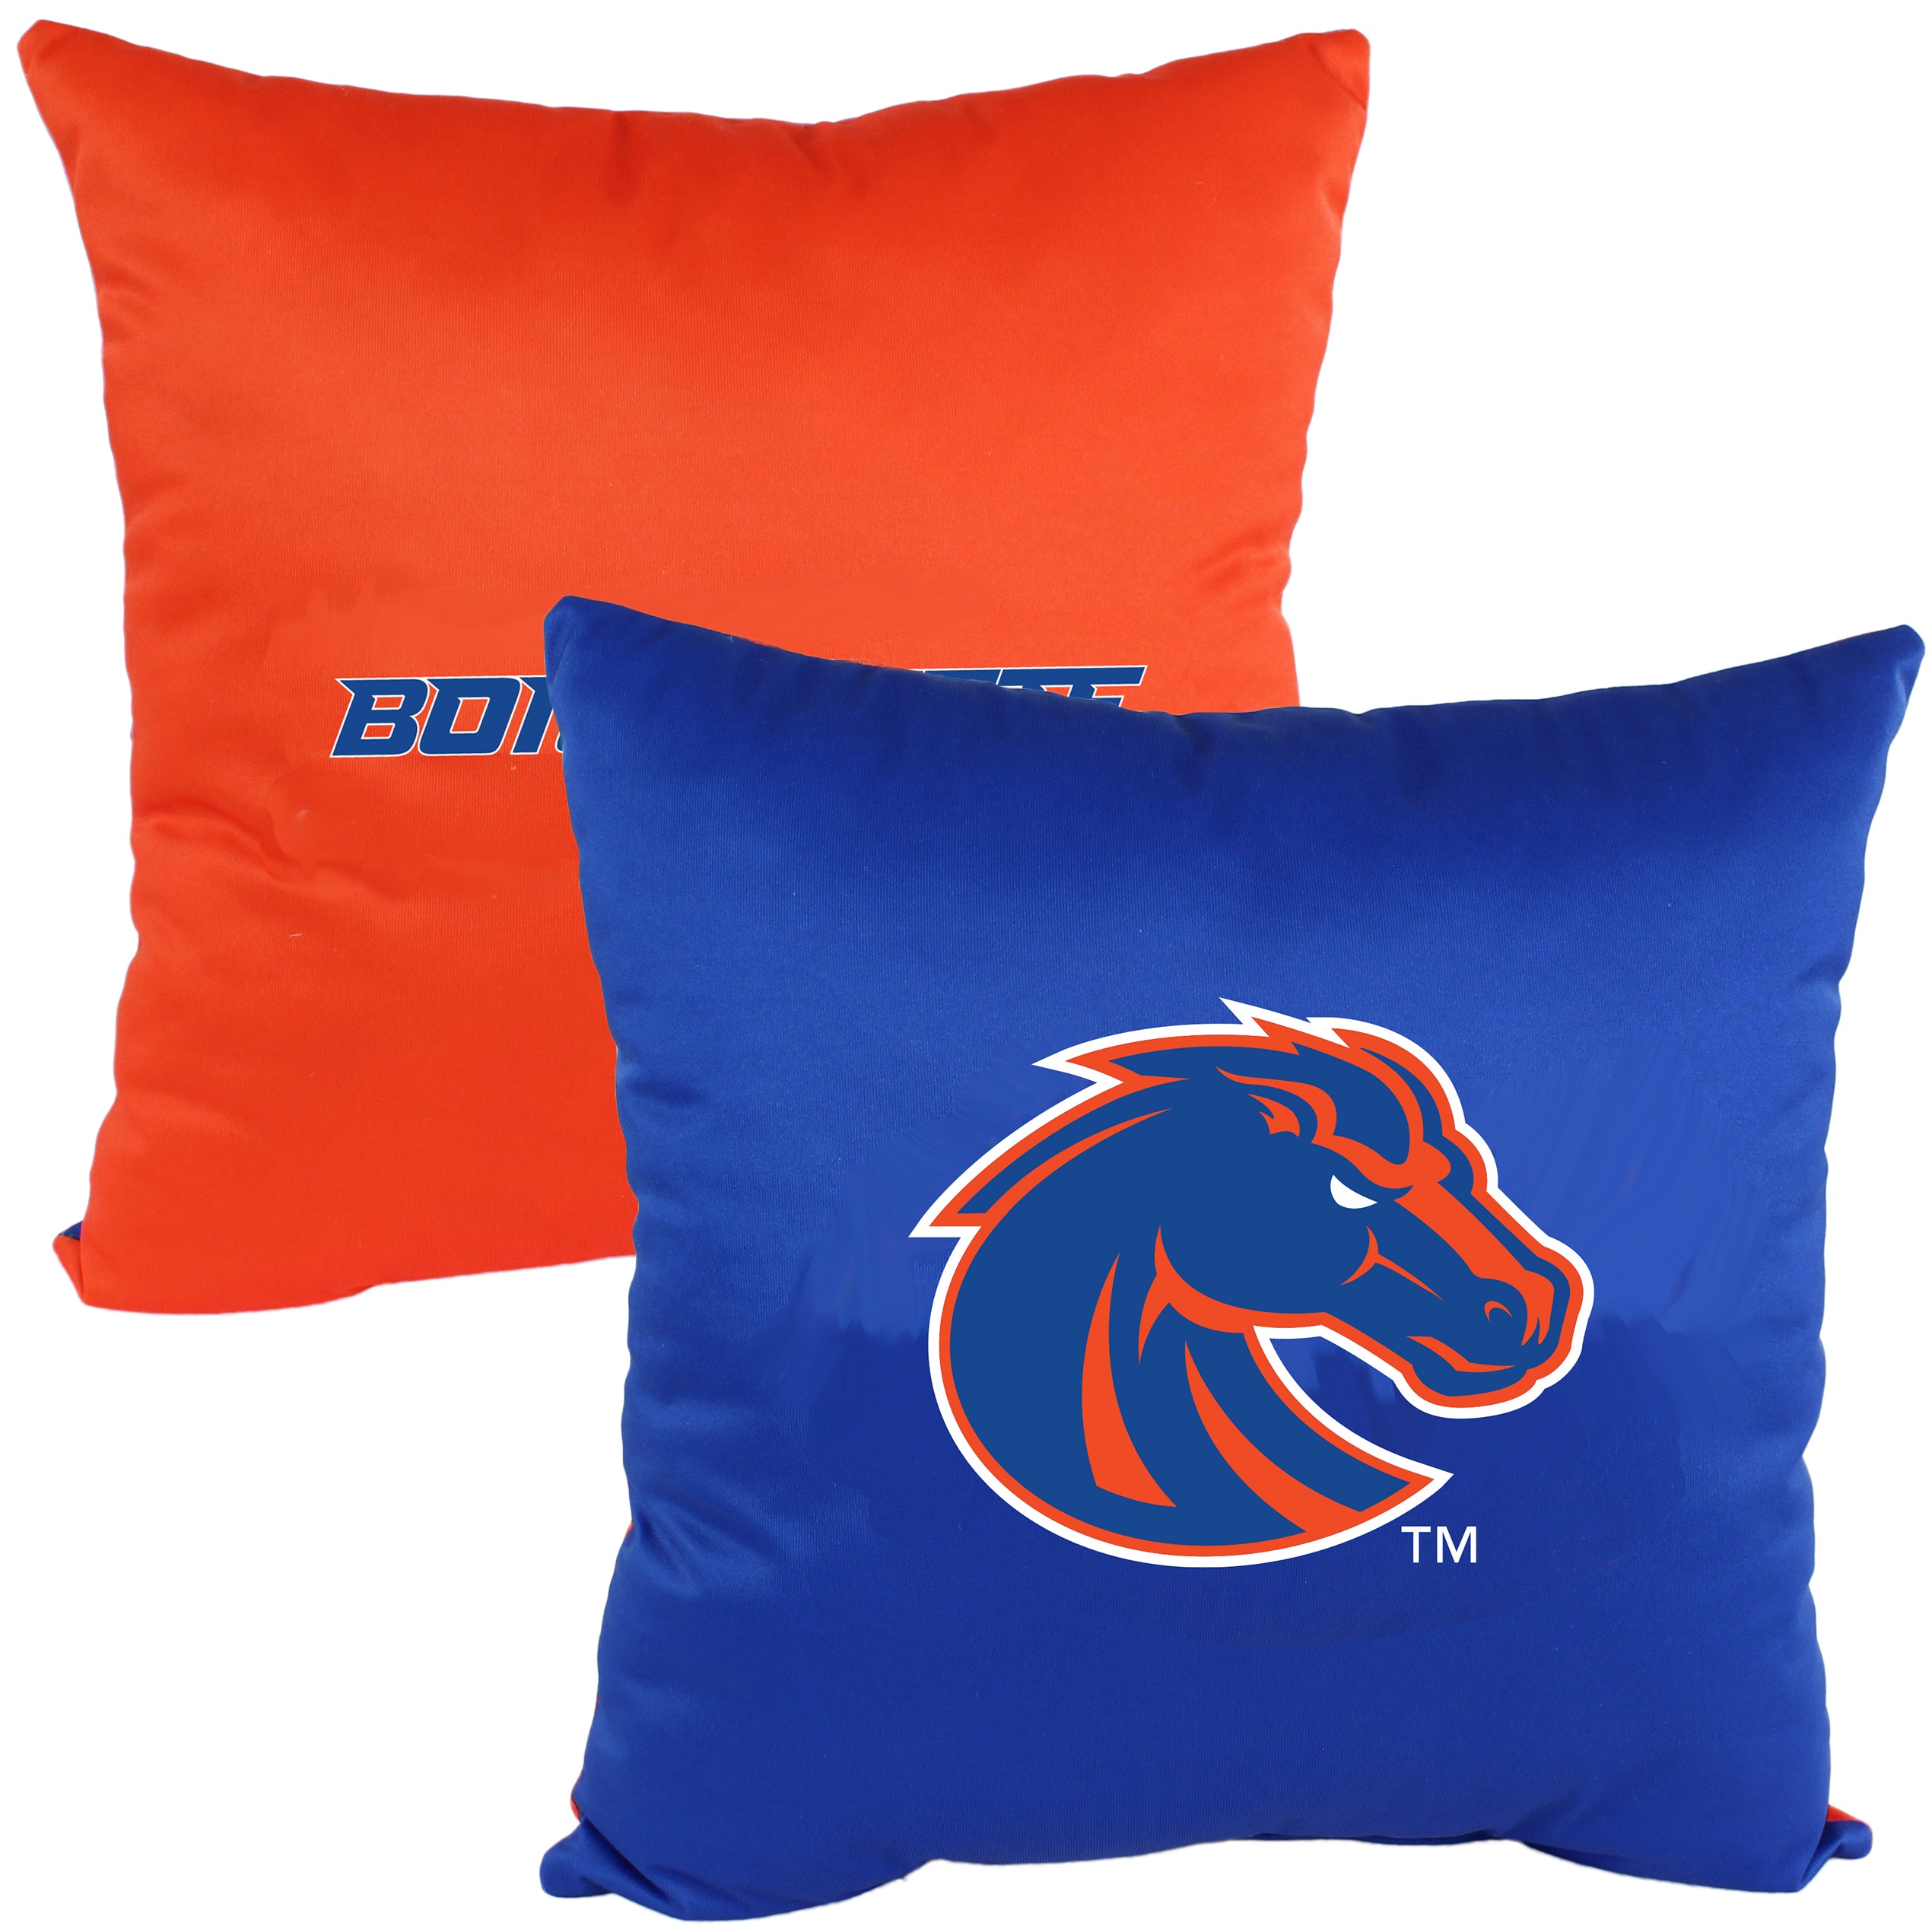 Boise State Broncos 16 inch Reversible Decorative Pillow - image 4 of 4